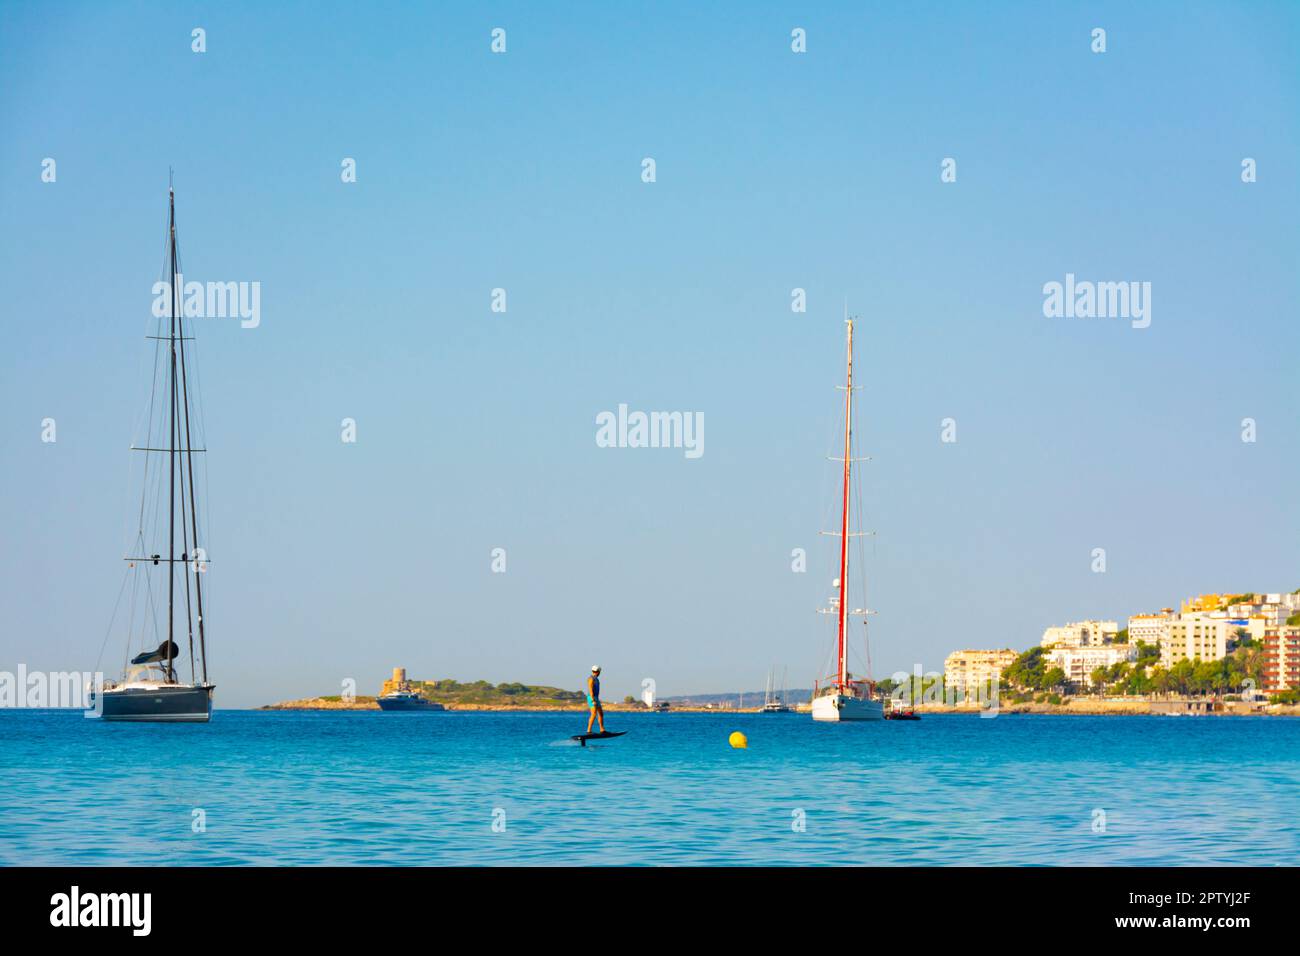 Palma, Mallorca, Spain. July 23, 2022 - Apartment buildings, moored sailing boats and man with fliteboard or jetsurf Stock Photo